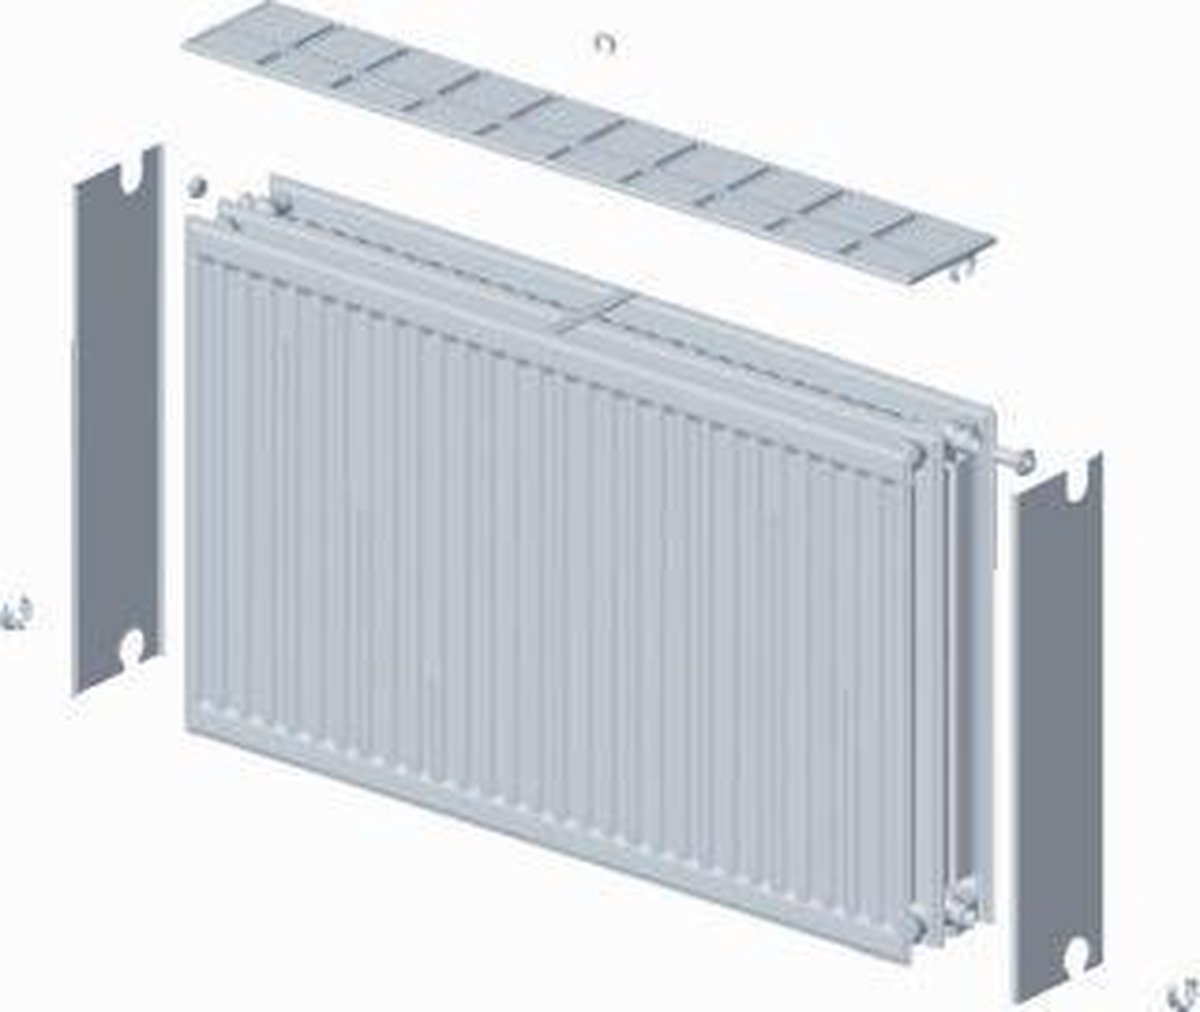 Stelrad paneelradiator Novello, staal, wit, (hxlxd) 400x1400x158mm, 33